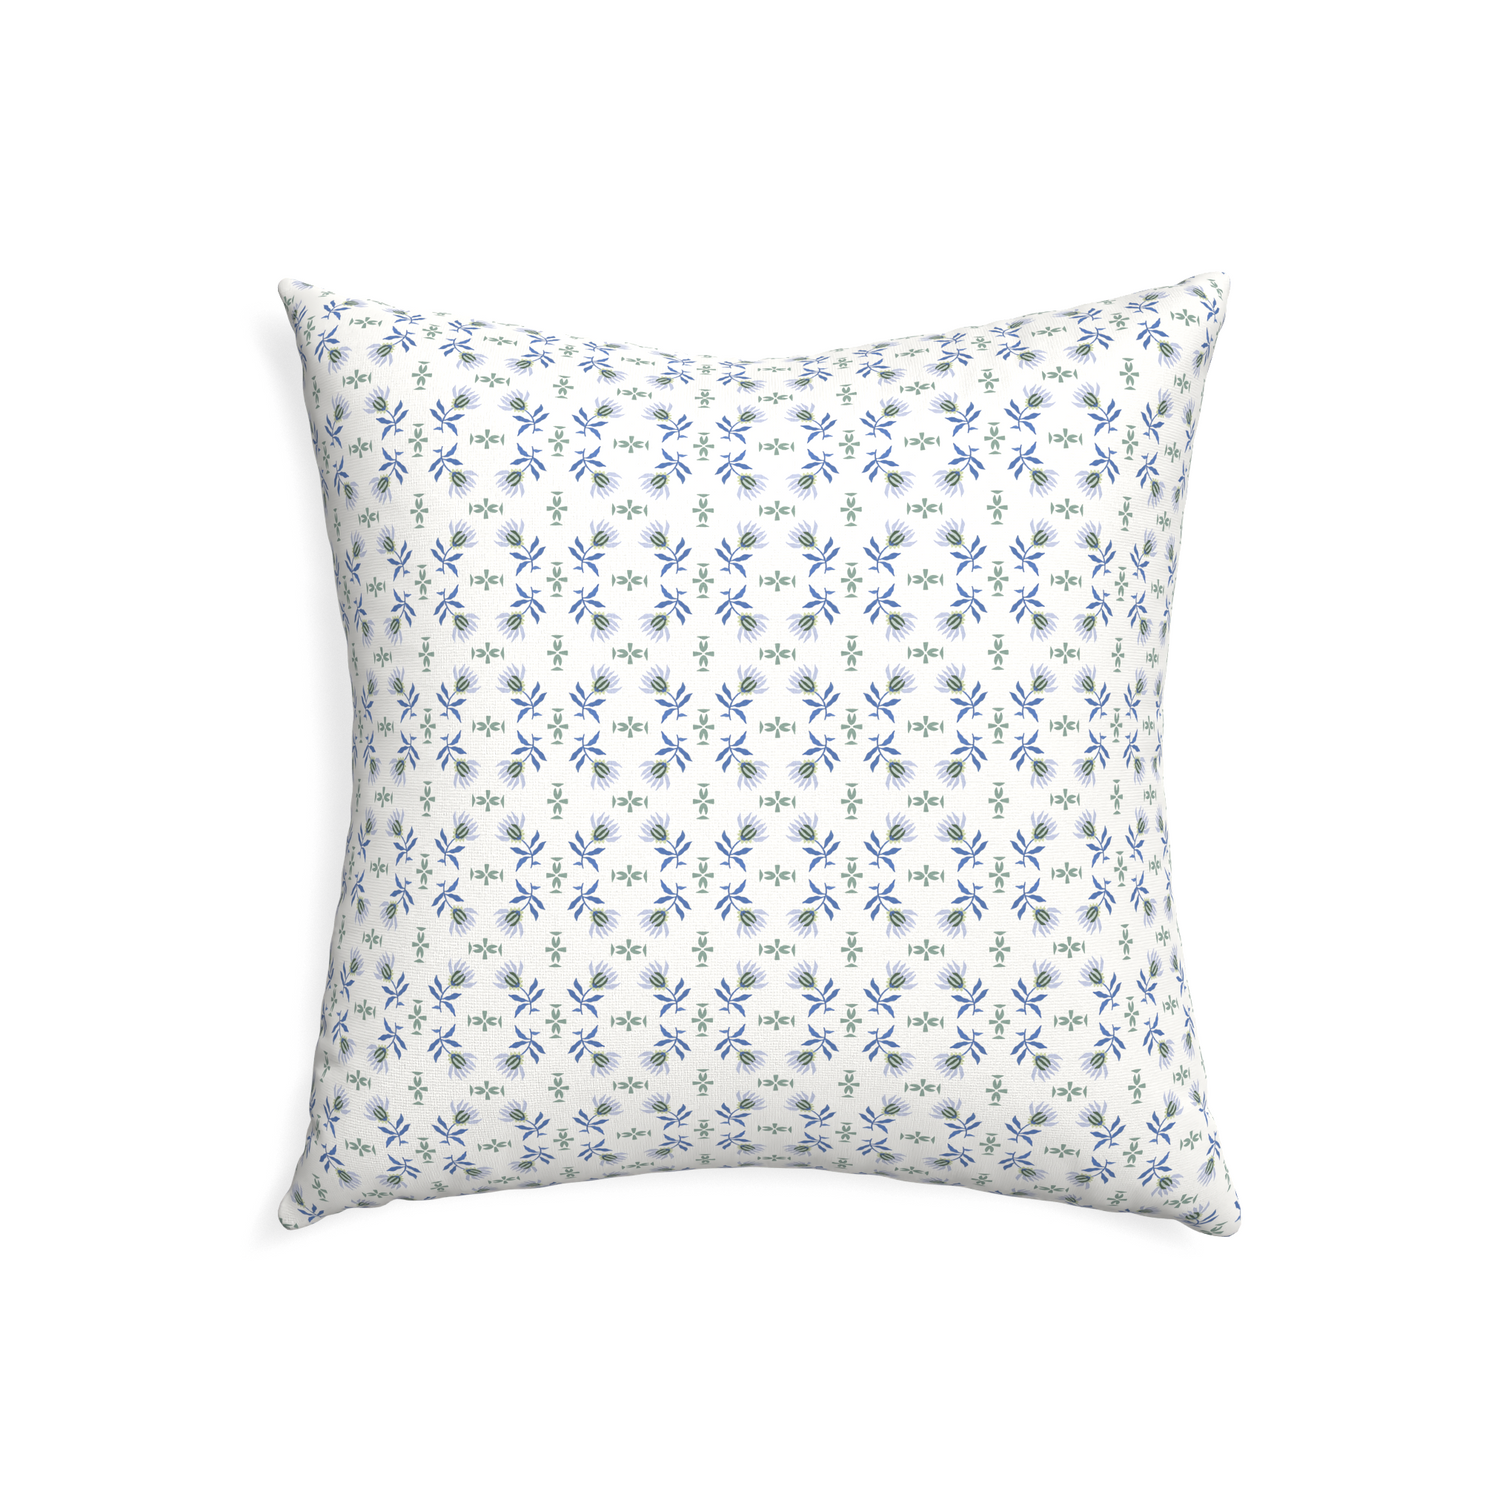 22-square lee custom pillow with none on white background